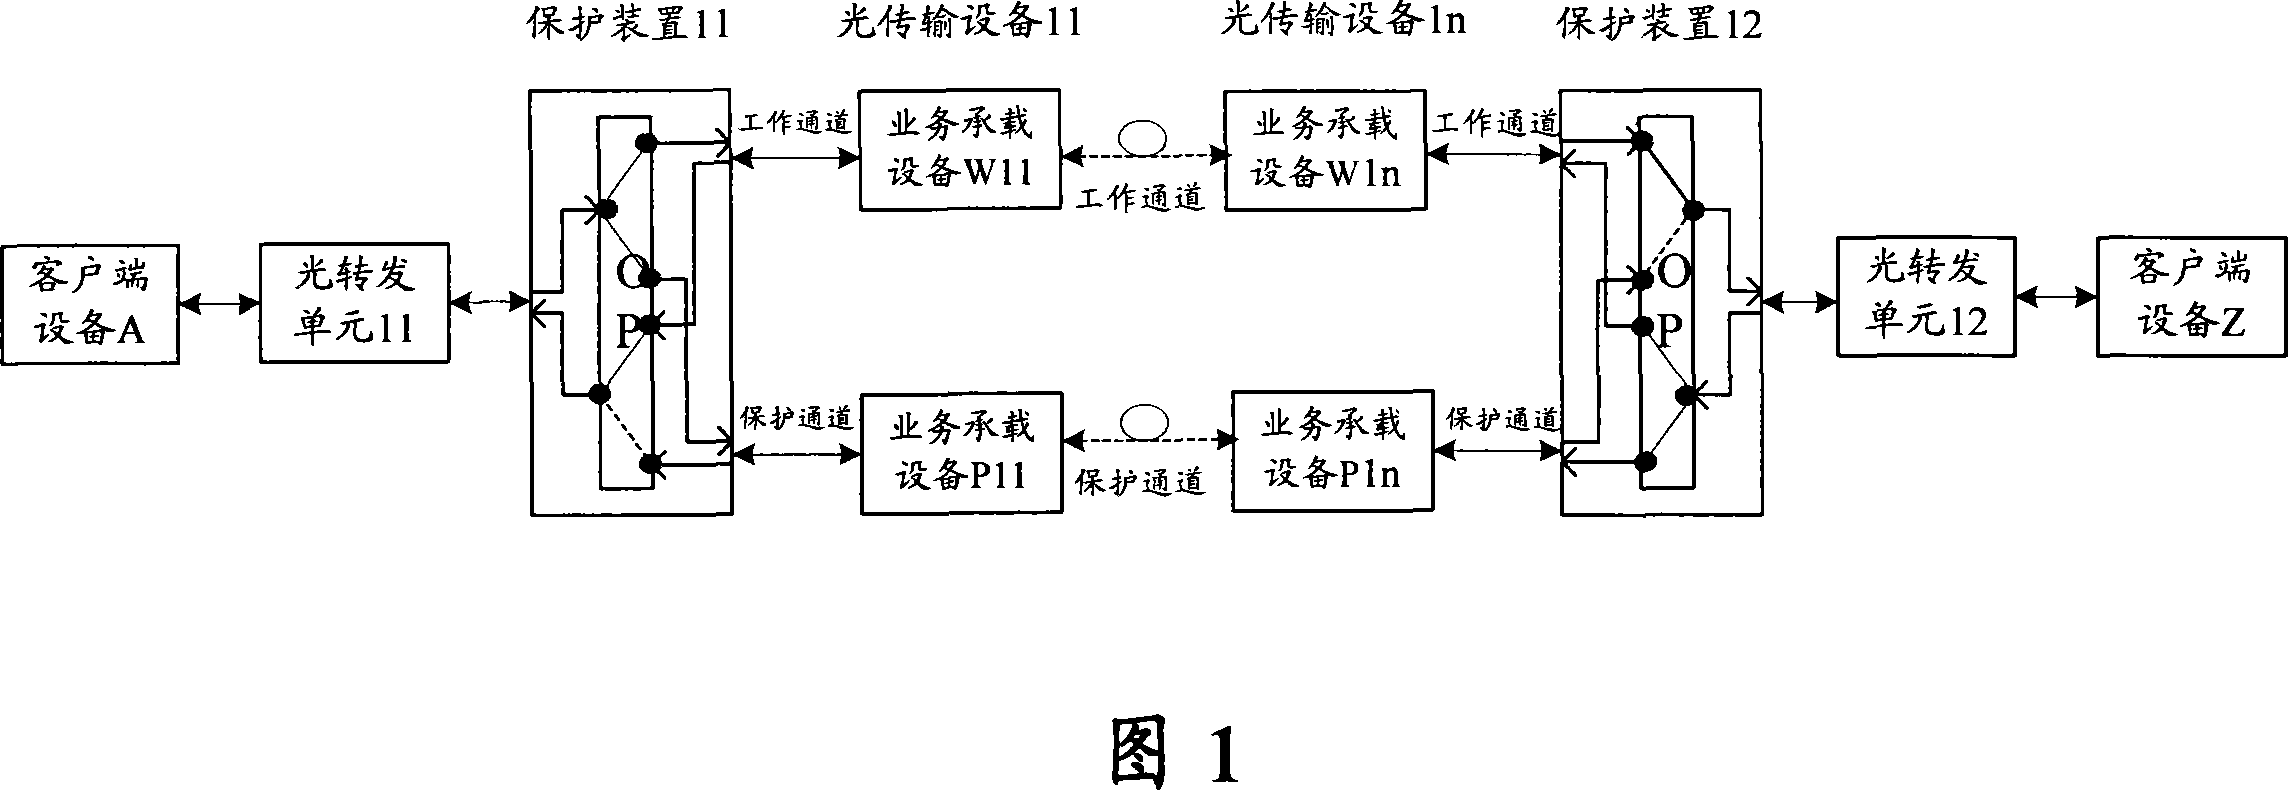 Implementation method for communication network 1+1 protective cascading networking